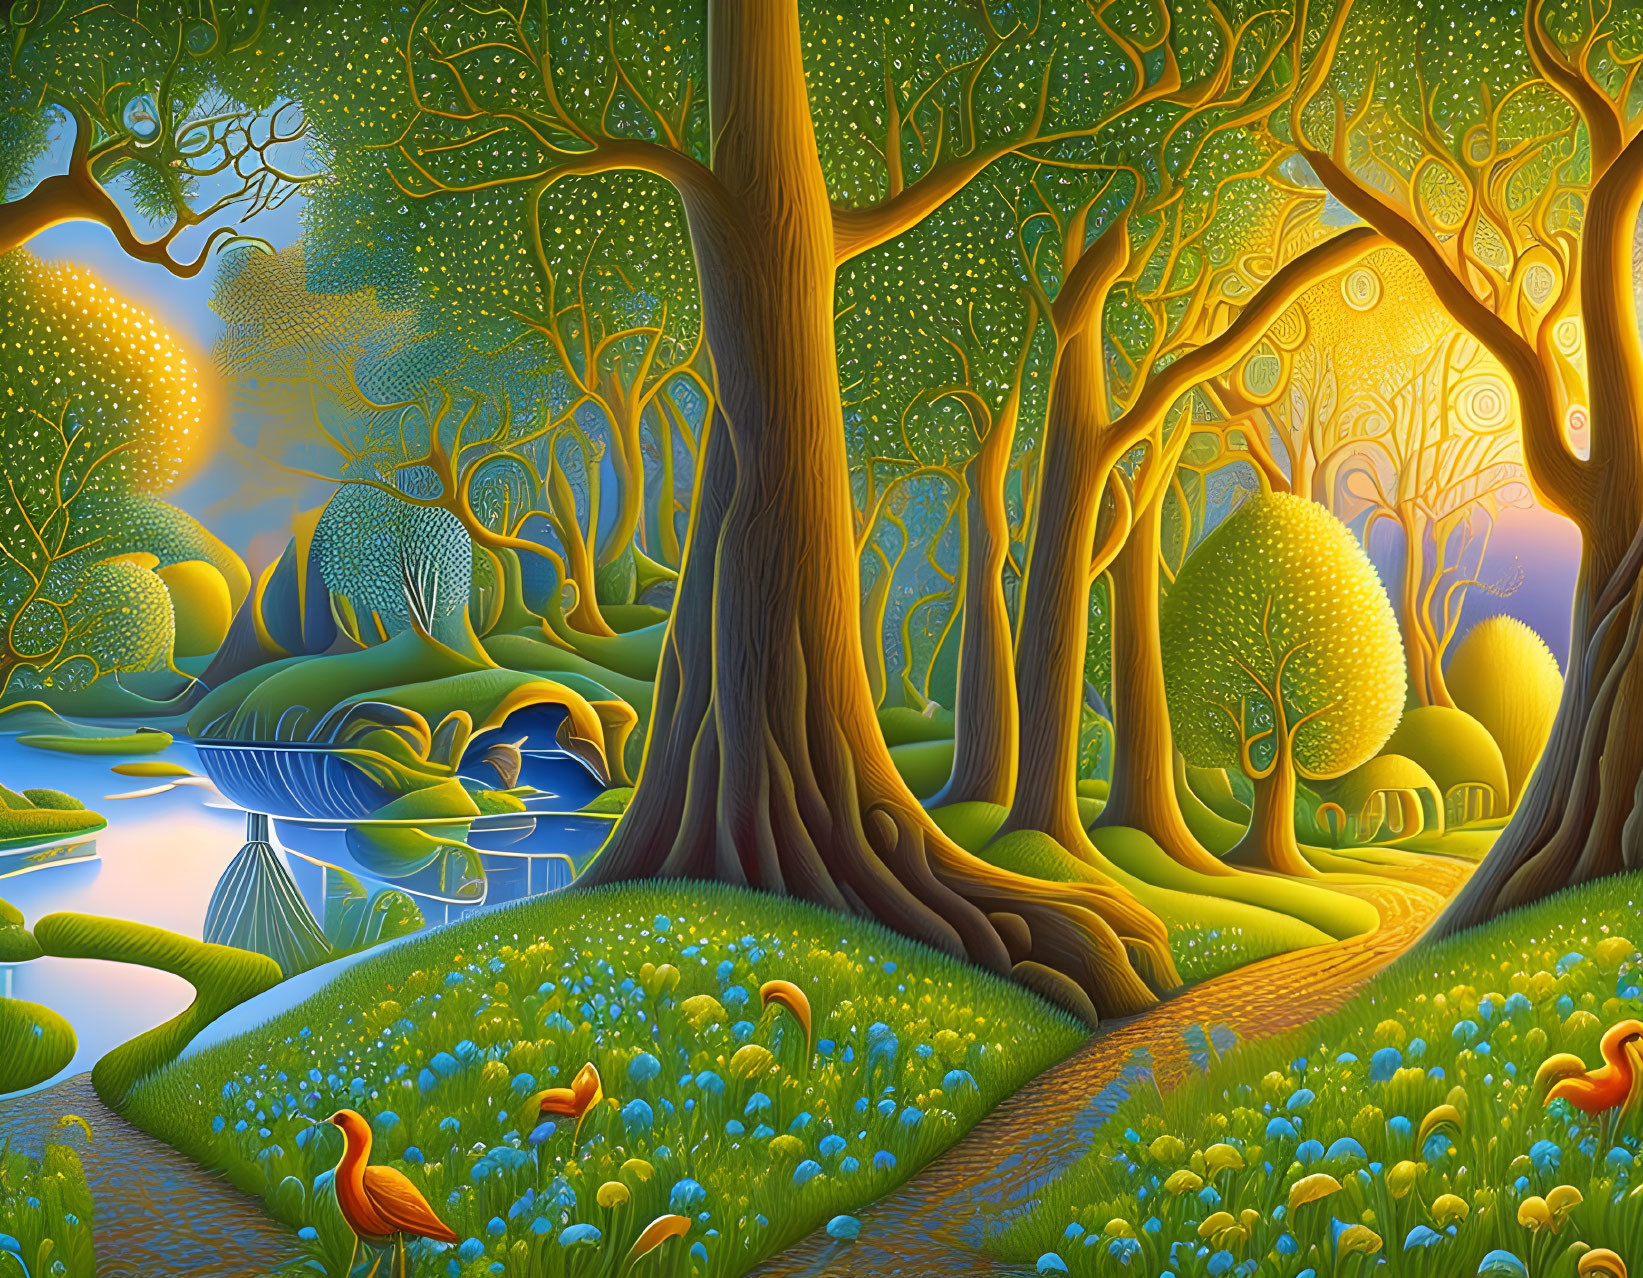 Vibrant landscape with stylized trees, glowing sun, river, flowers, and birds